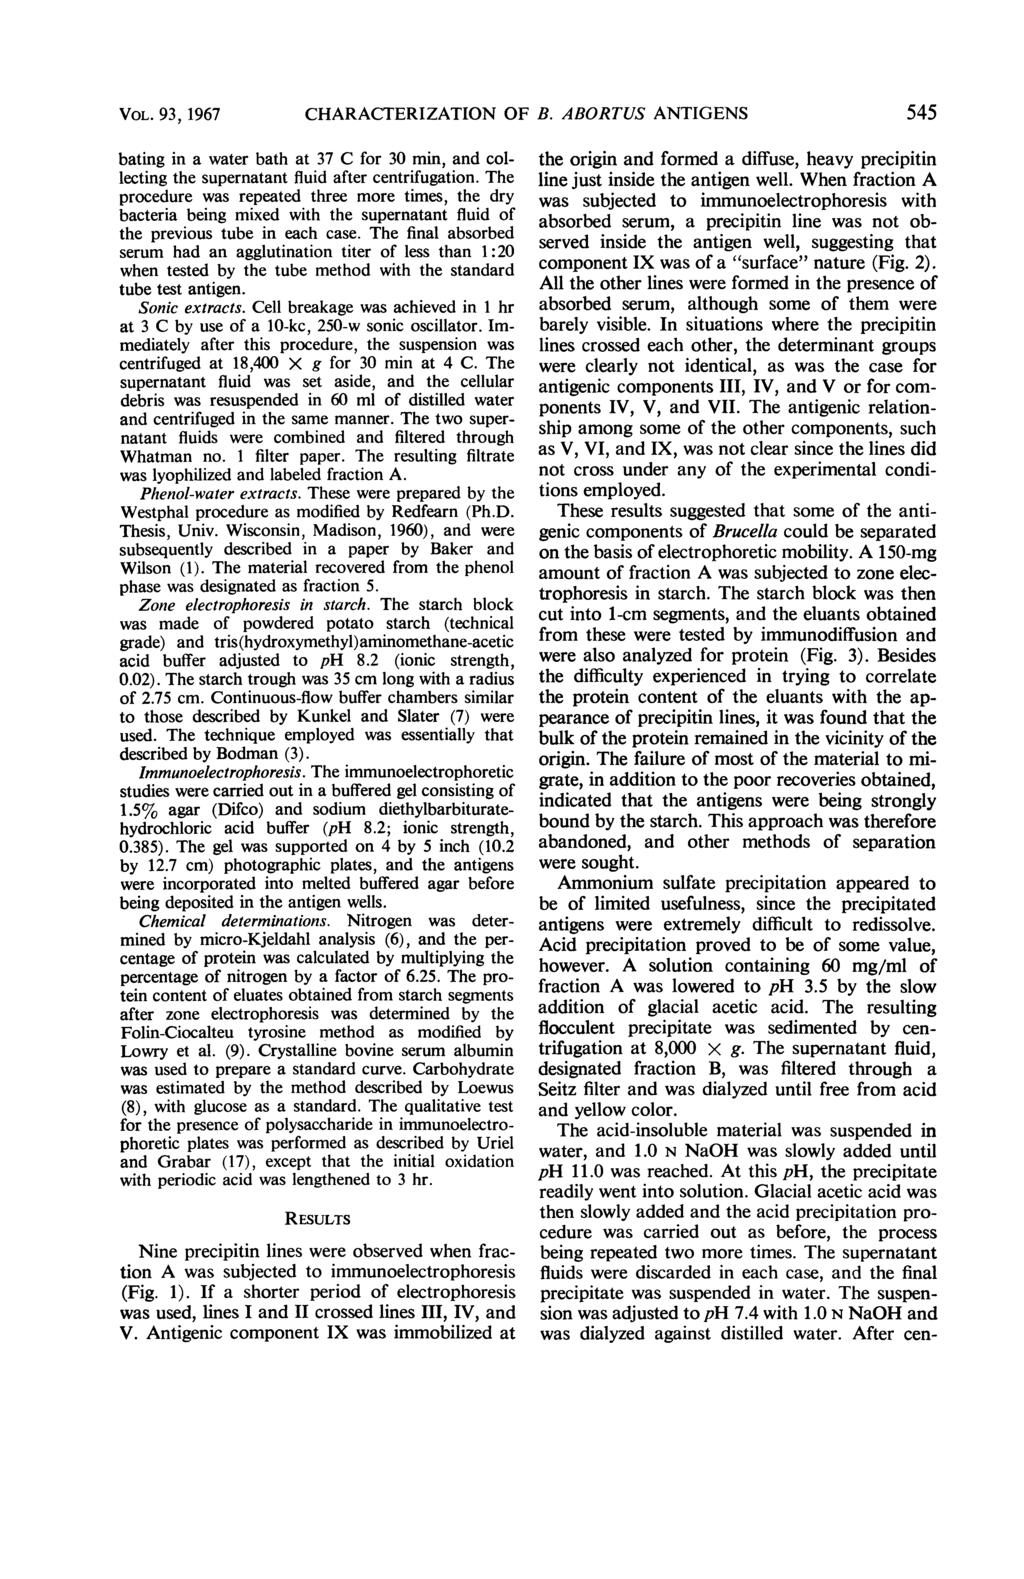 VOL. 93, 1967 CHARACTERIZATION OF B. ABORTUS ANTIGENS 545 bating in a water bath at 37 C for 30 min, and collecting the supernatant fluid after centrifugation.